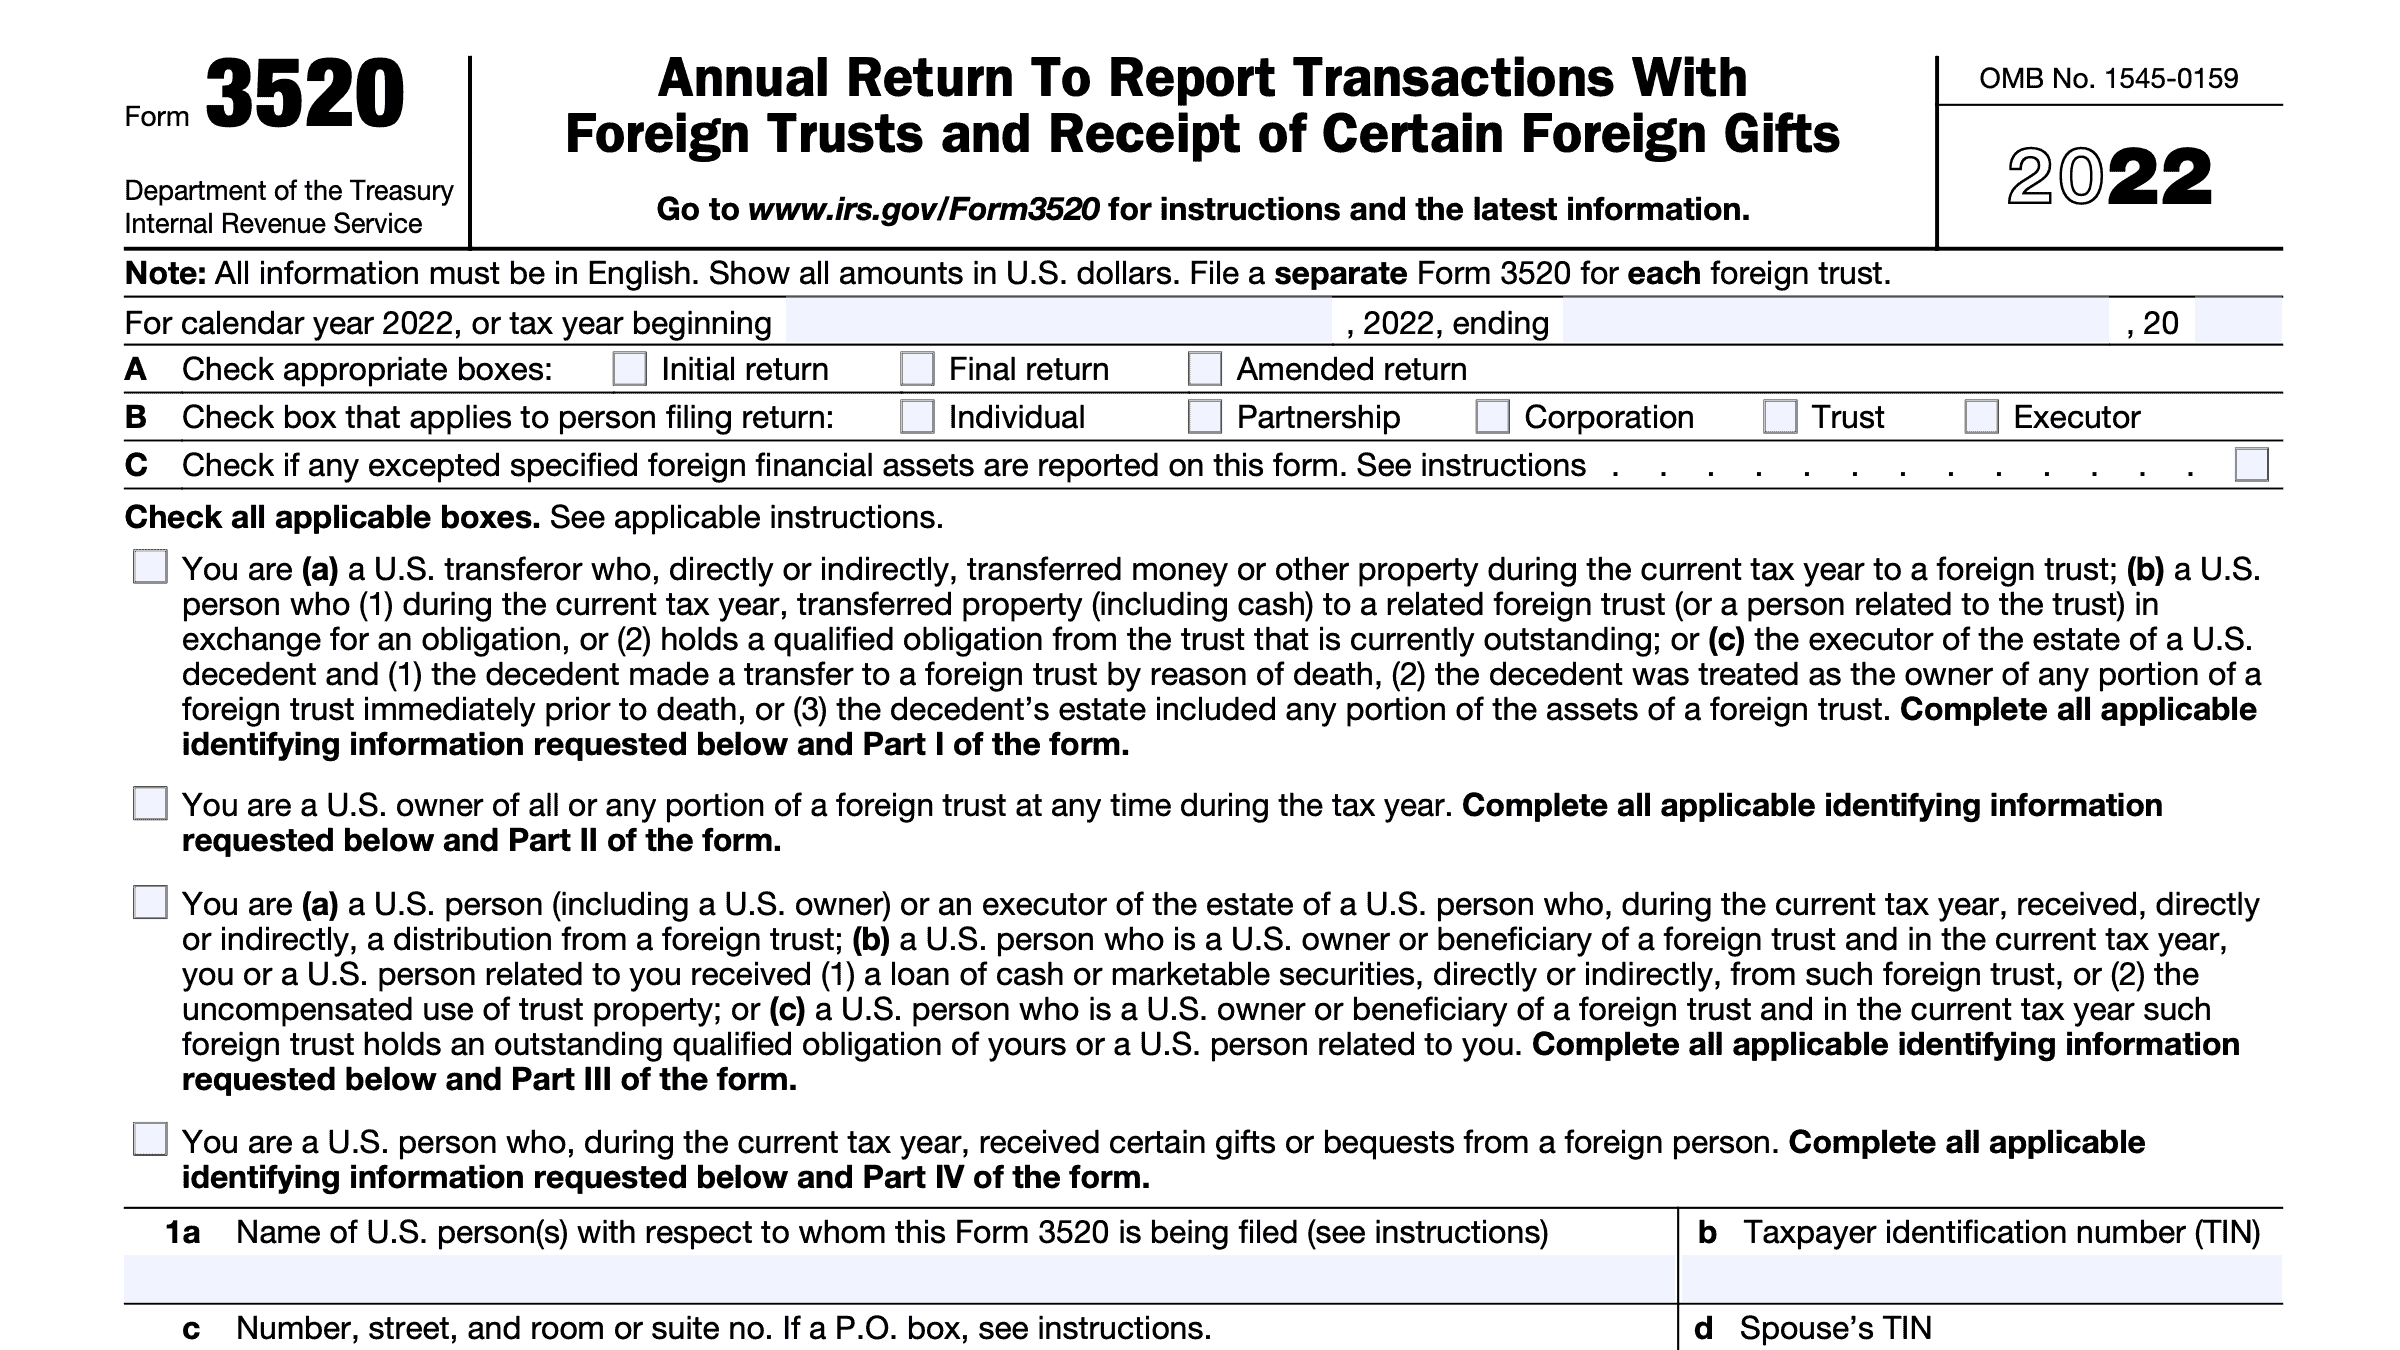 IRS Form 3520 Reporting Transactions With Foreign Trusts